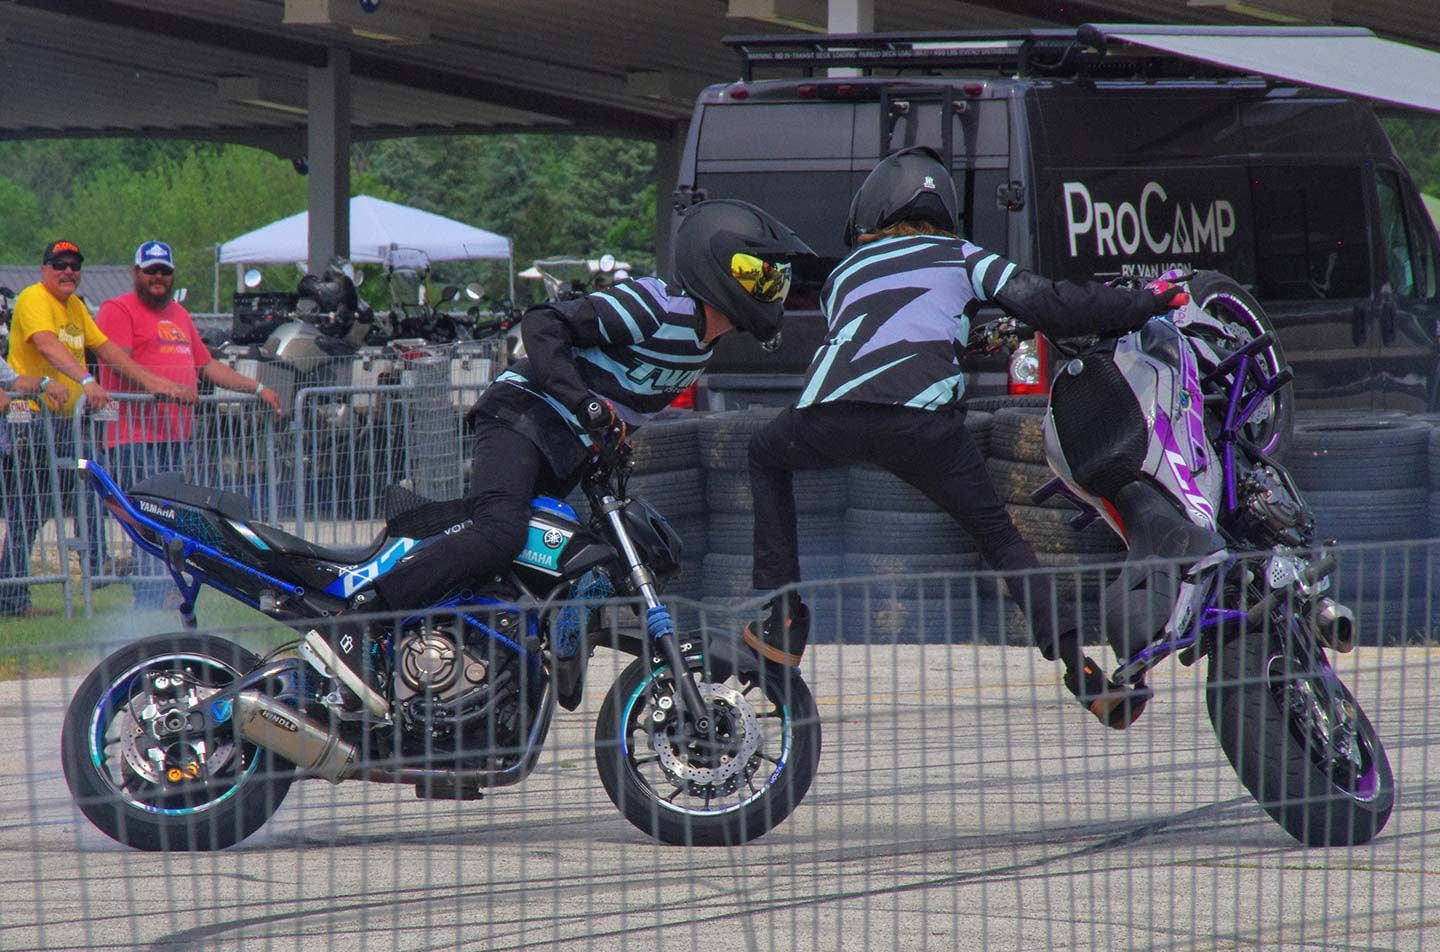 Those magnificent men and their stunting machines: Stunt riders entertain the masses on Saturday afternoon.